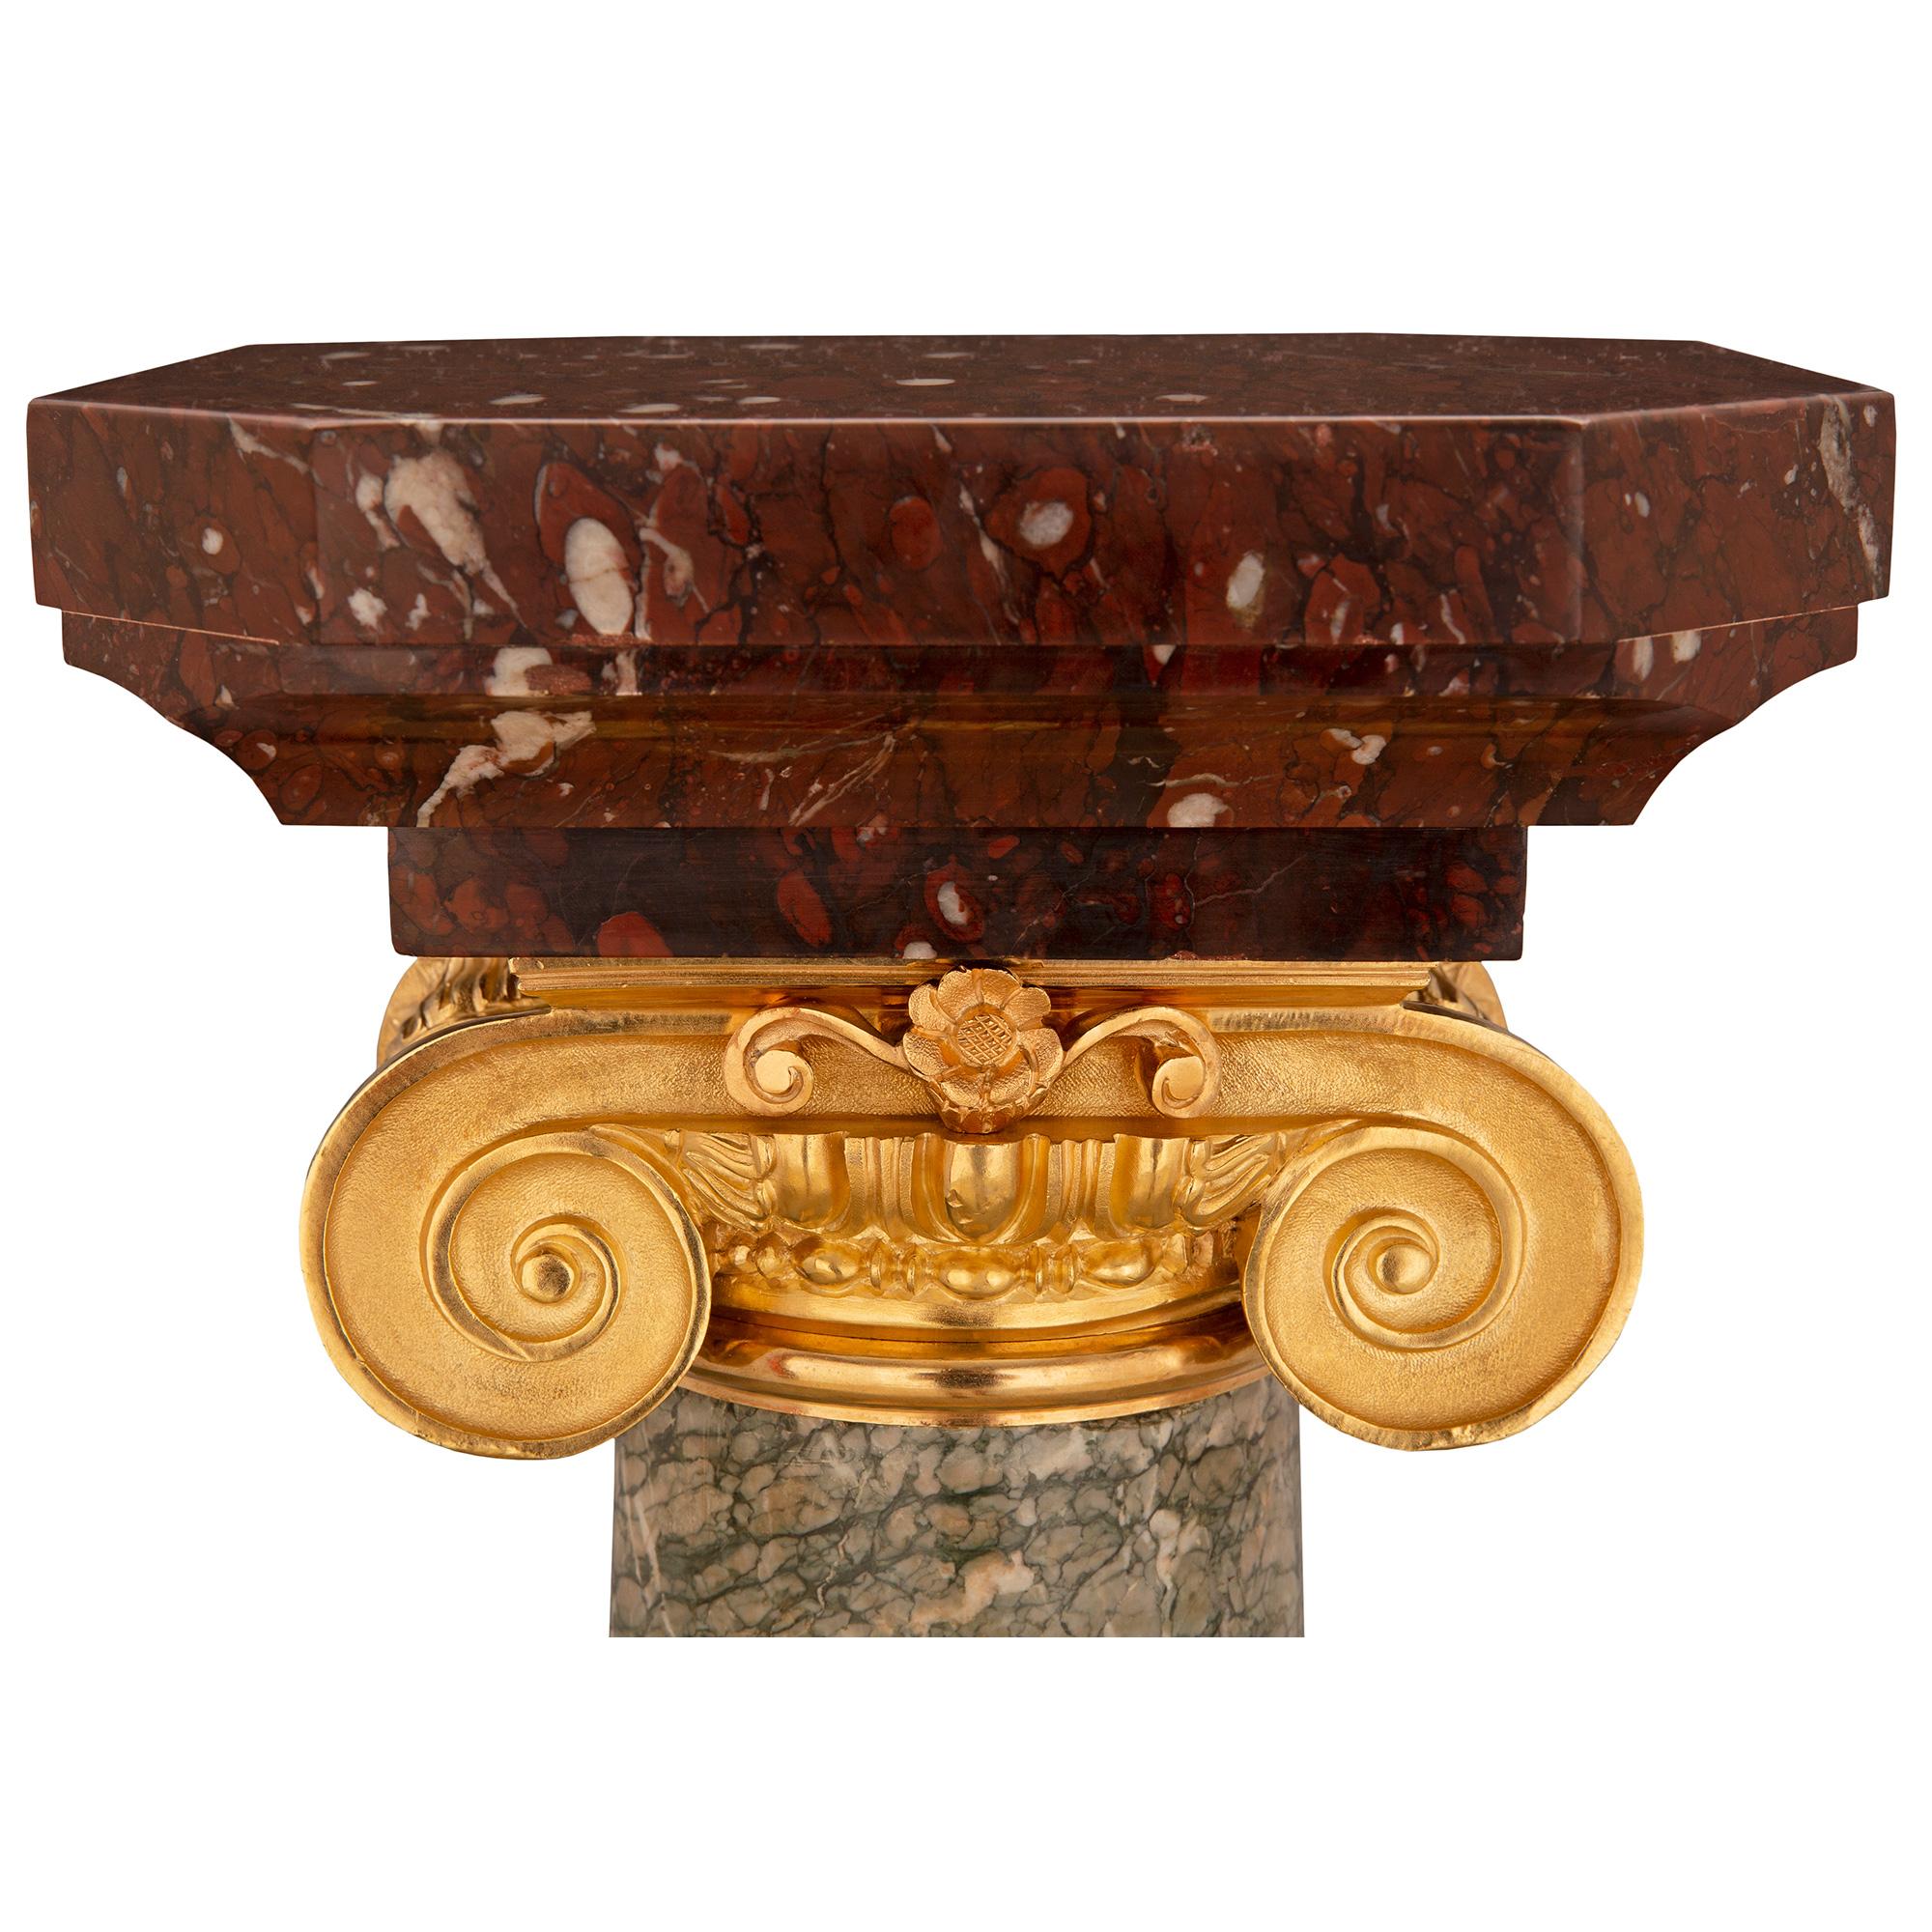 French 19th Century Louis XVI St. Marble, Granite and Ormolu Pedestal Column For Sale 2